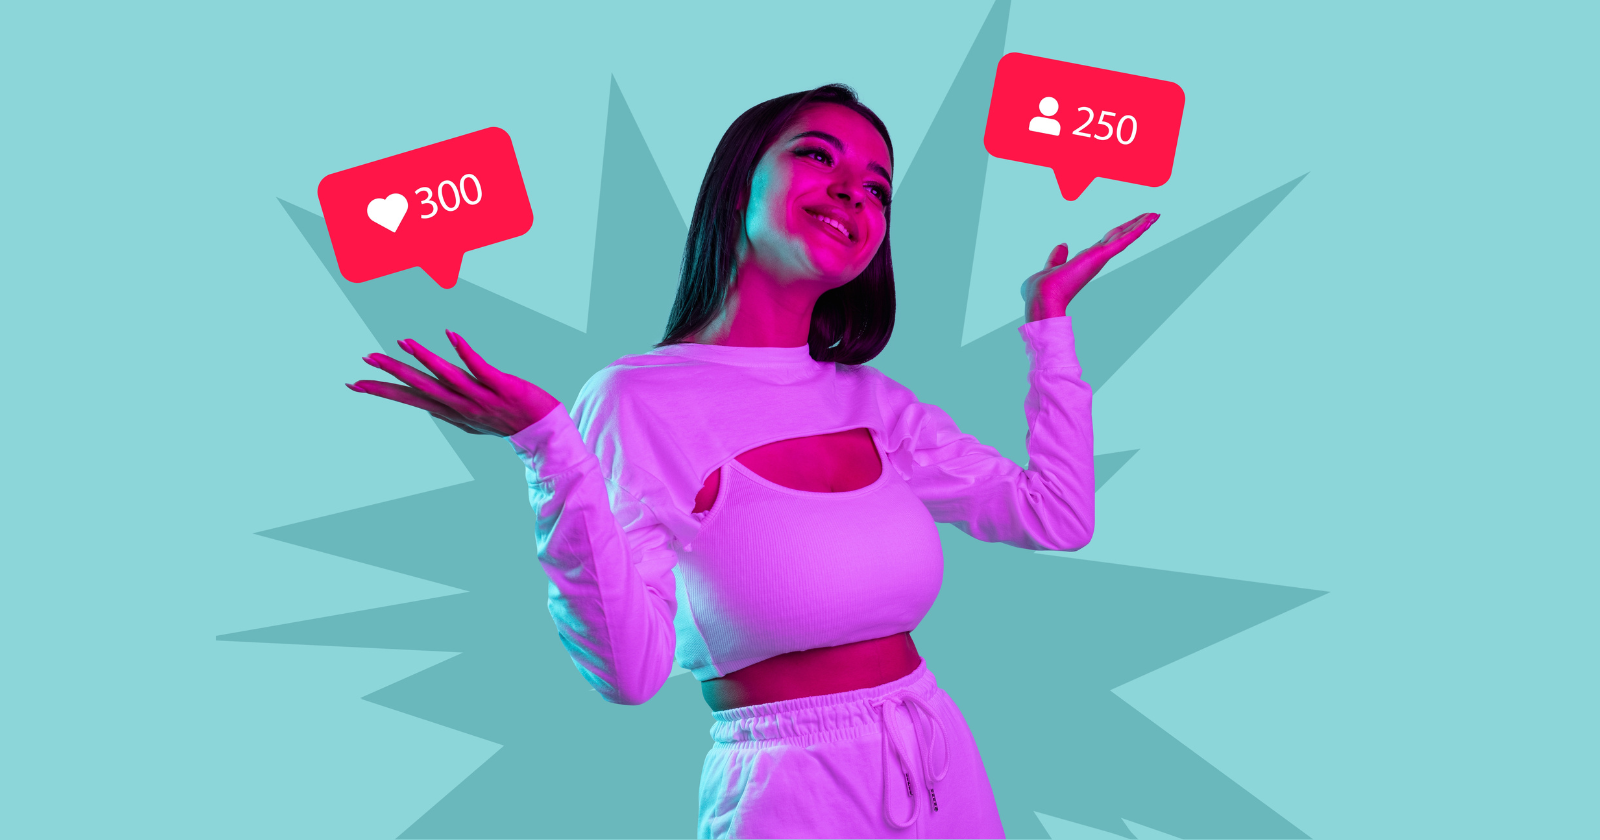 How reliable are social media influencers in what they promote